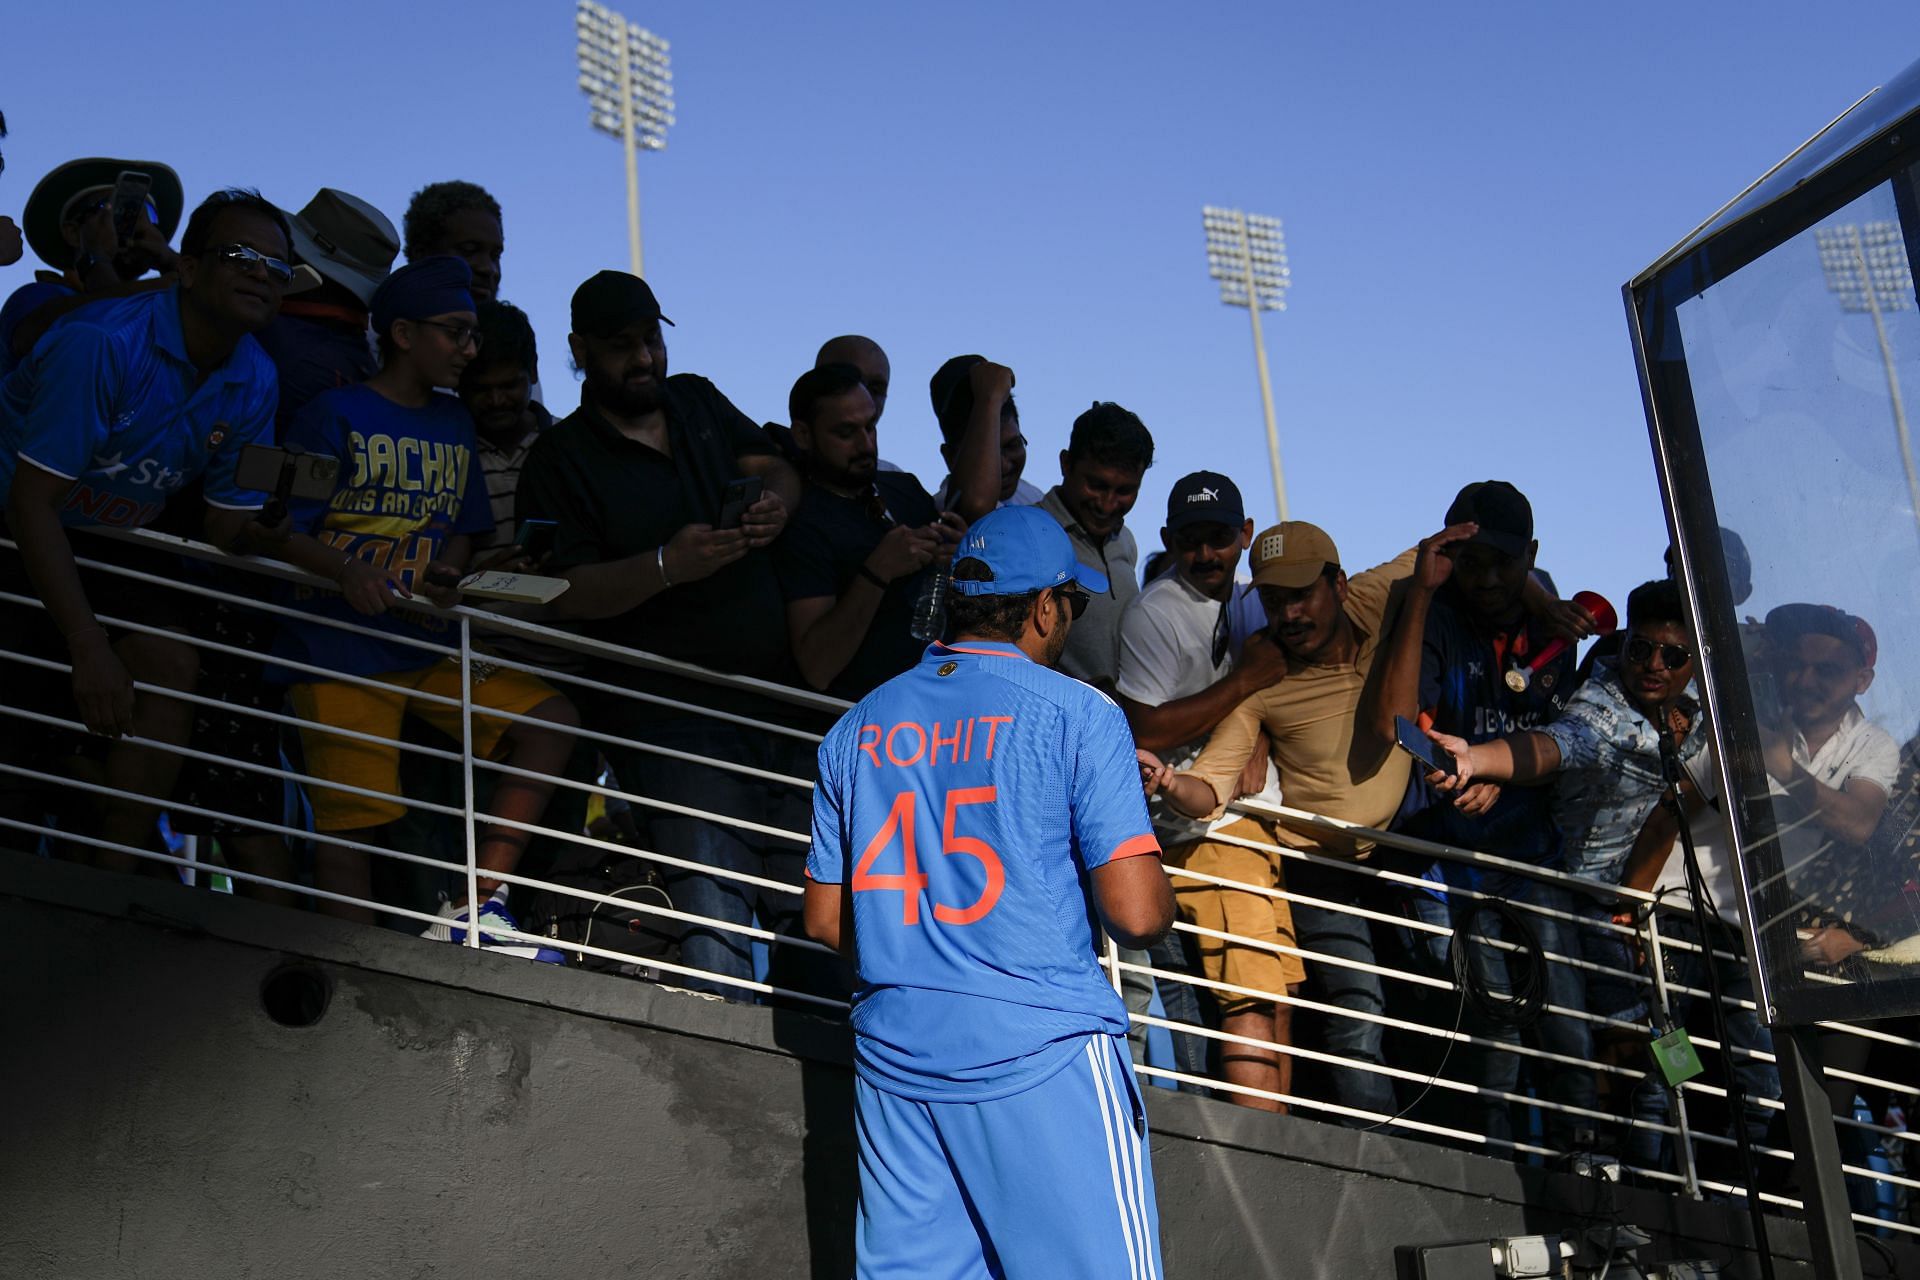 Team India skipper Rohit Sharma will need to come good in the Asia Cup